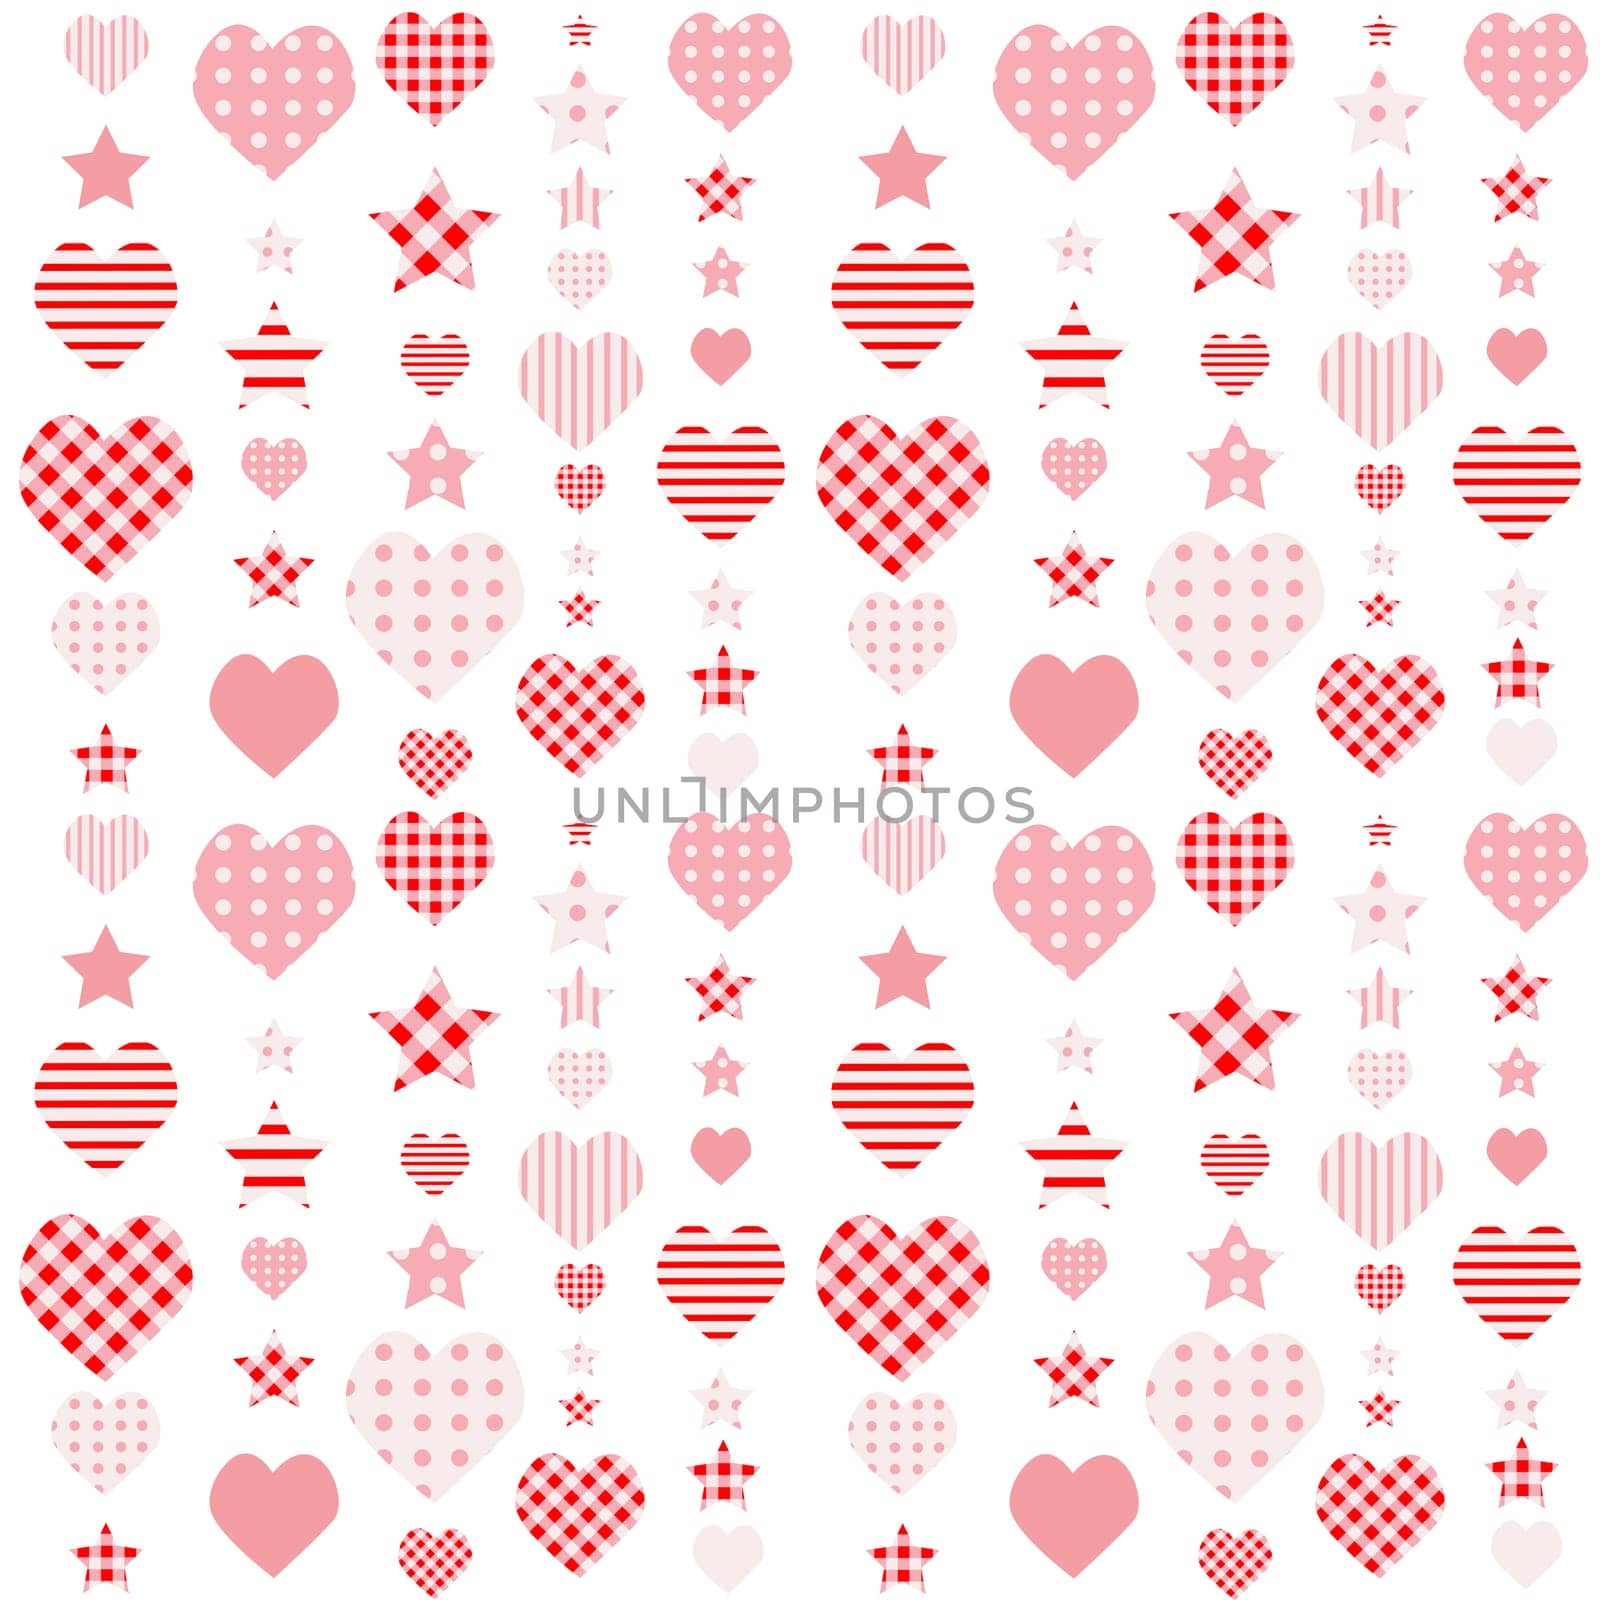 Background with hearts and stars in different prints.